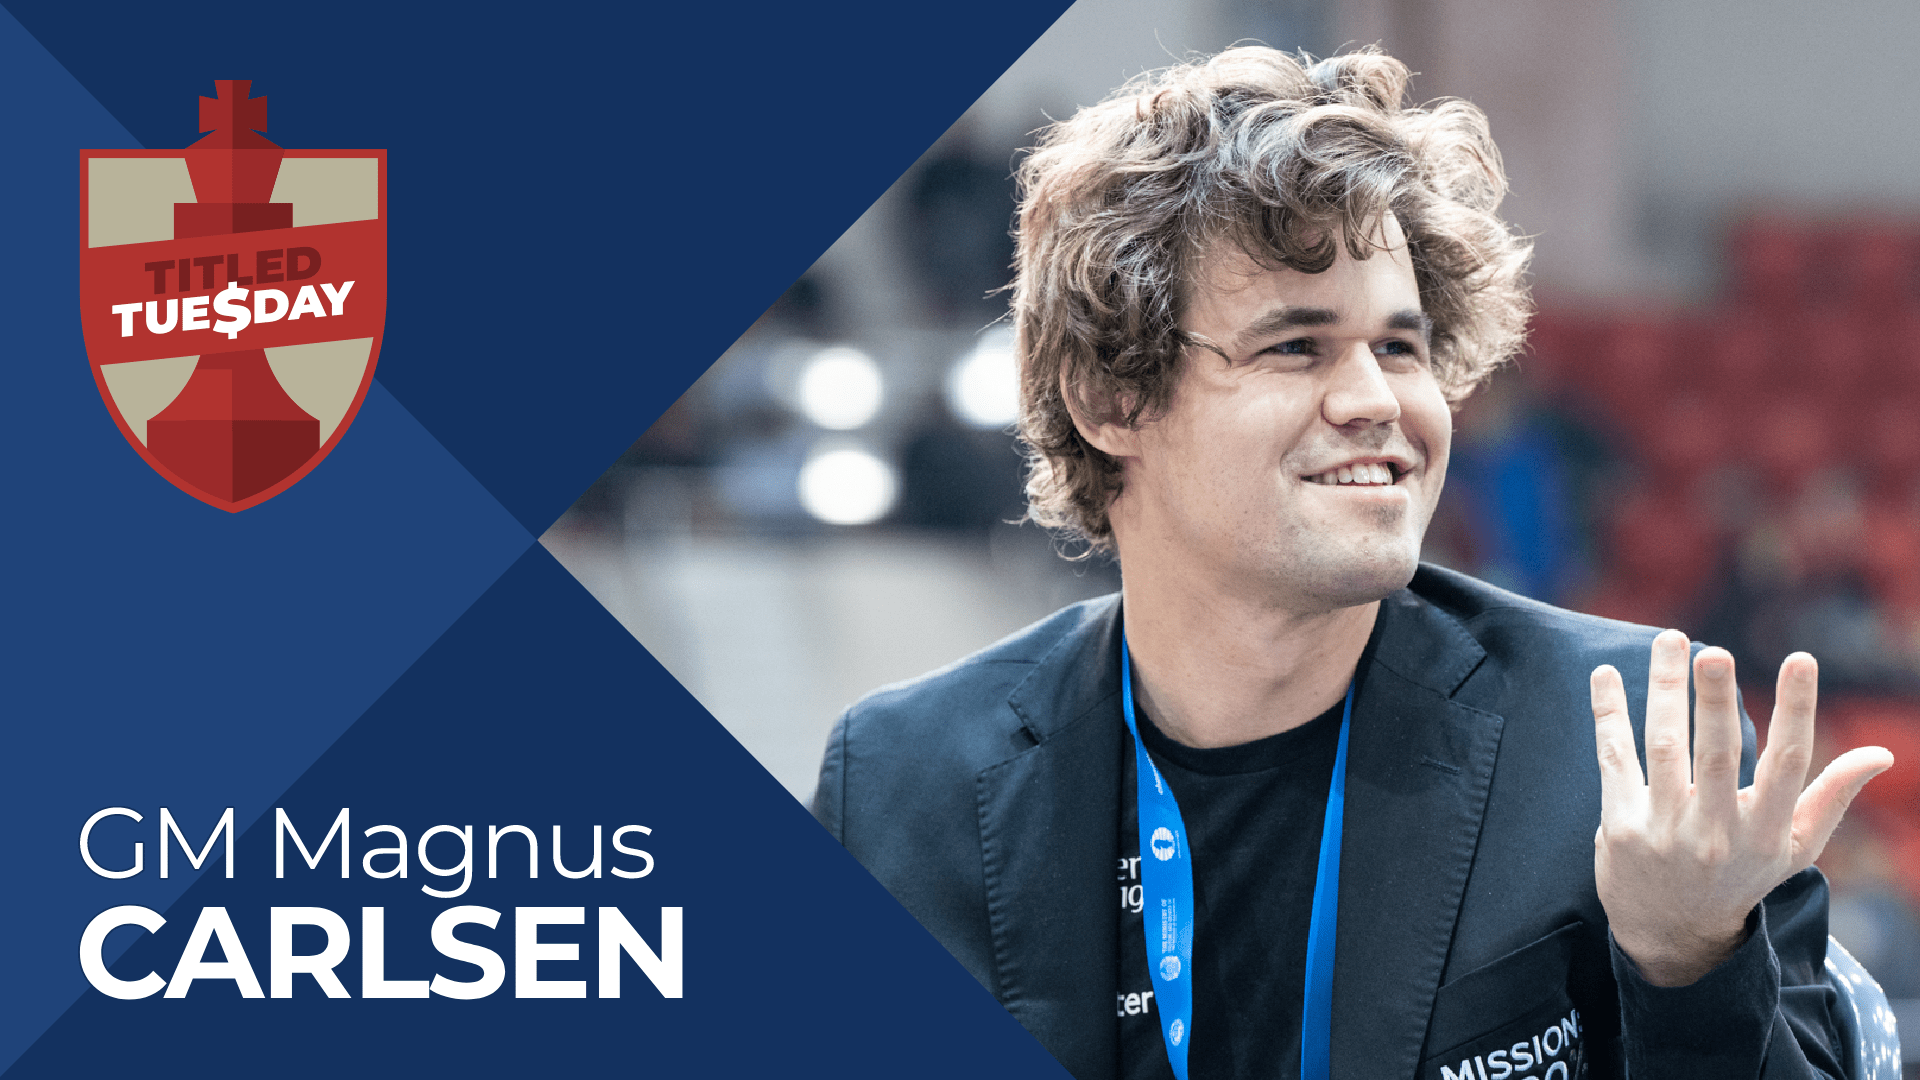 Carlsen Returns To Crush Titled Tuesday